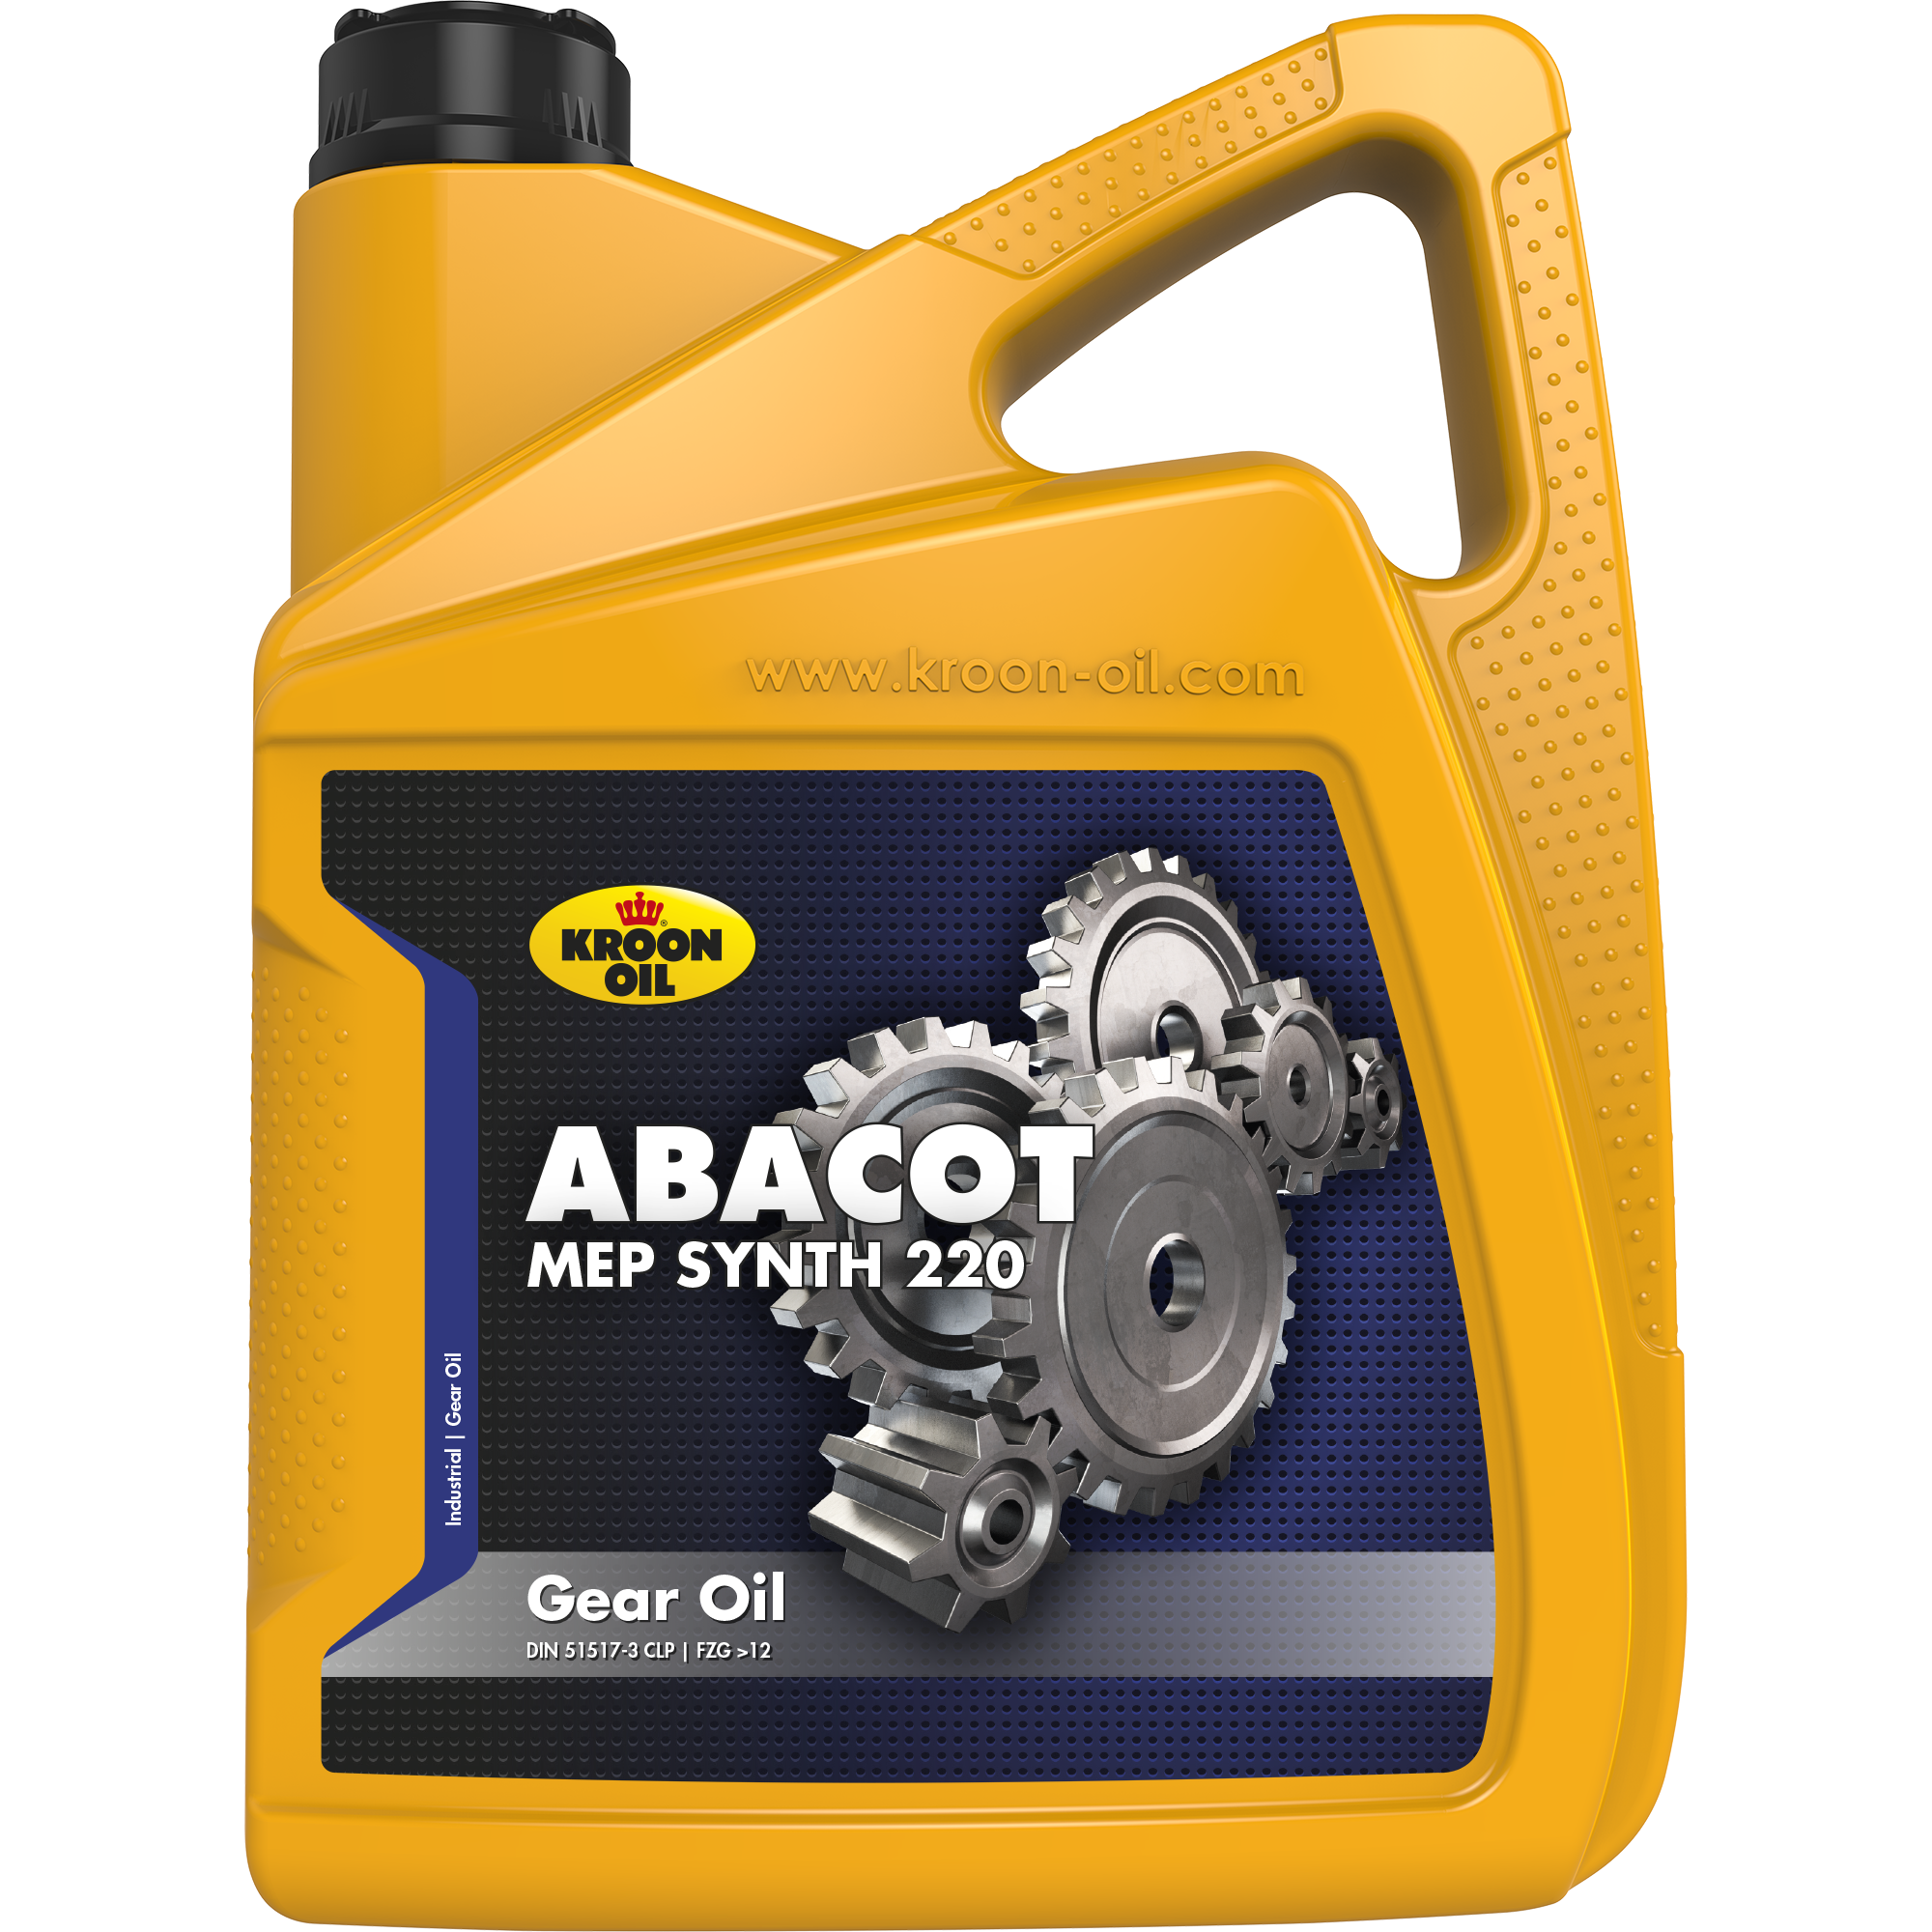 Kroon-Oil Abacot MEP Synth 220, 5 lt